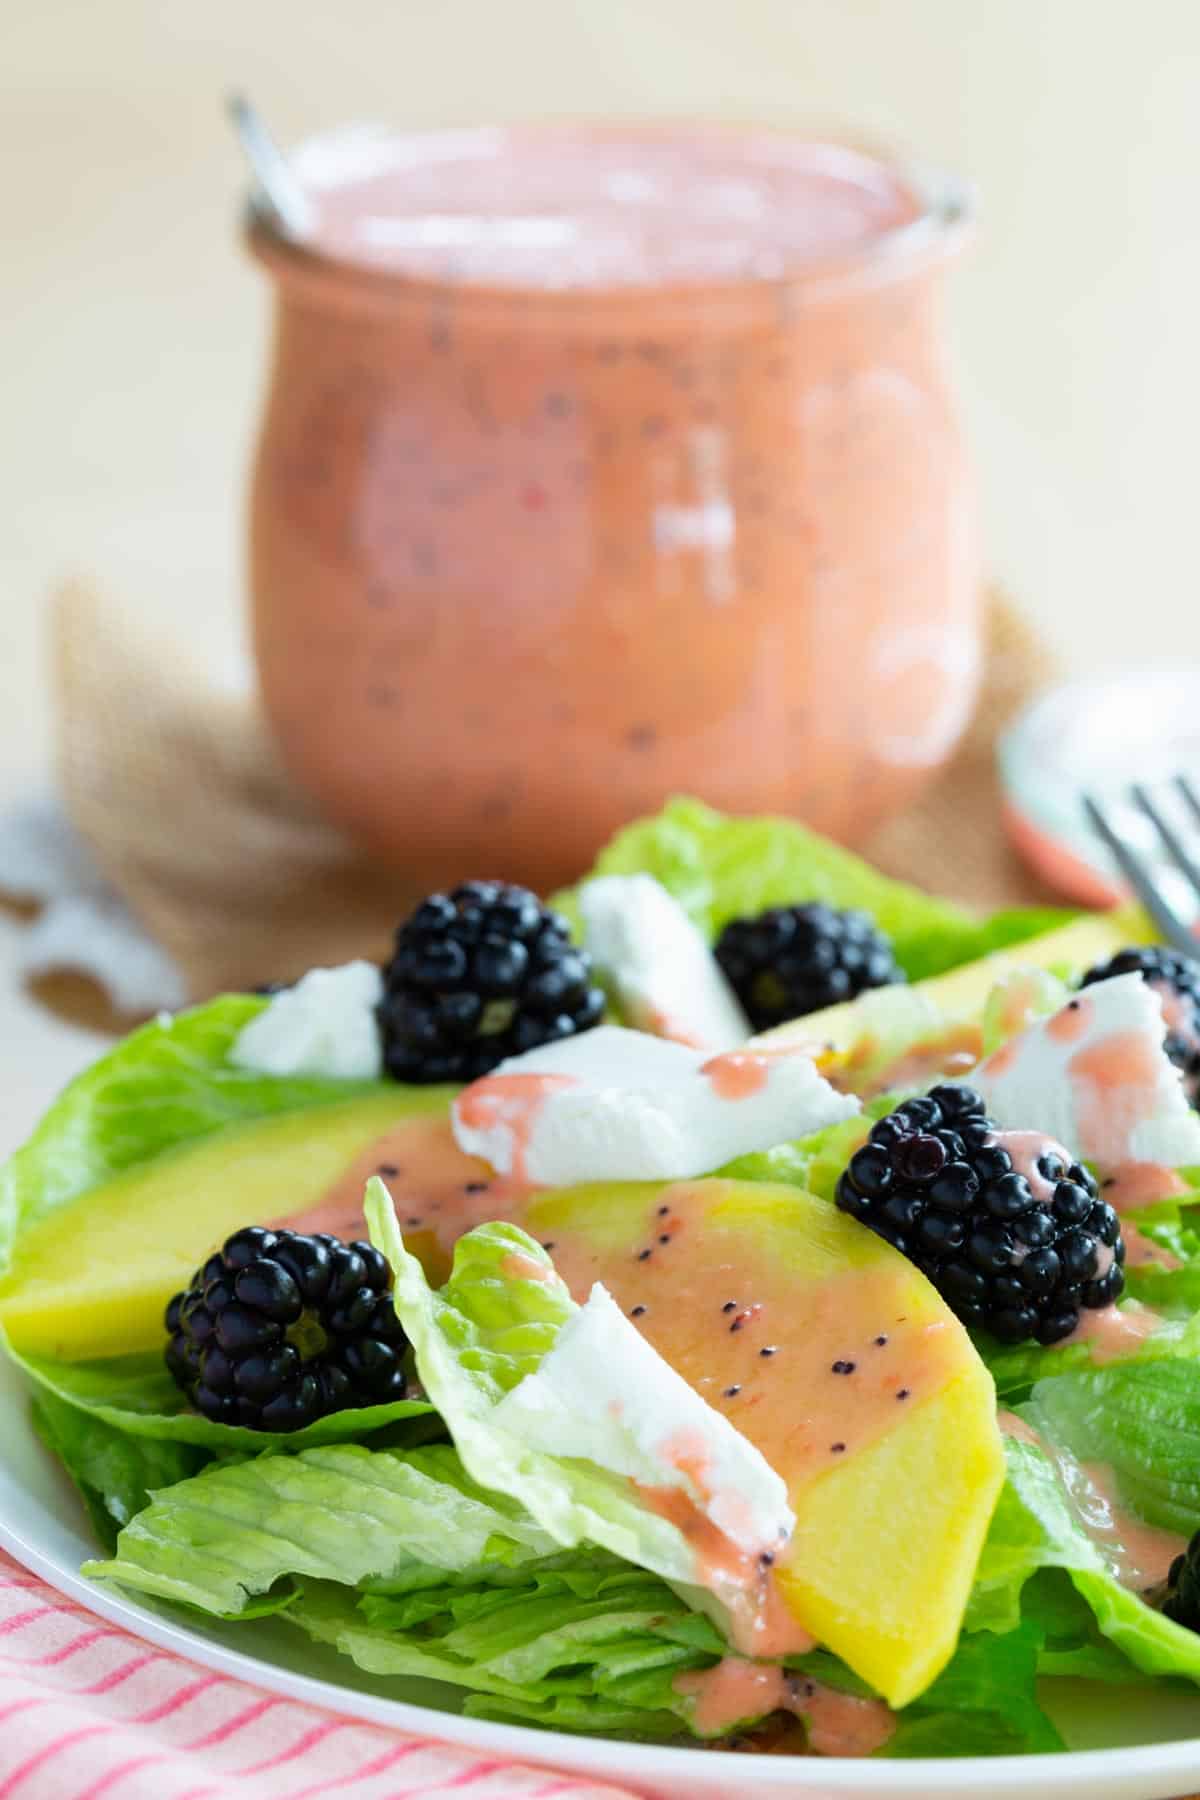 Salad with blackberries, mango sliced, goat cheese, and poppyseed dressing.